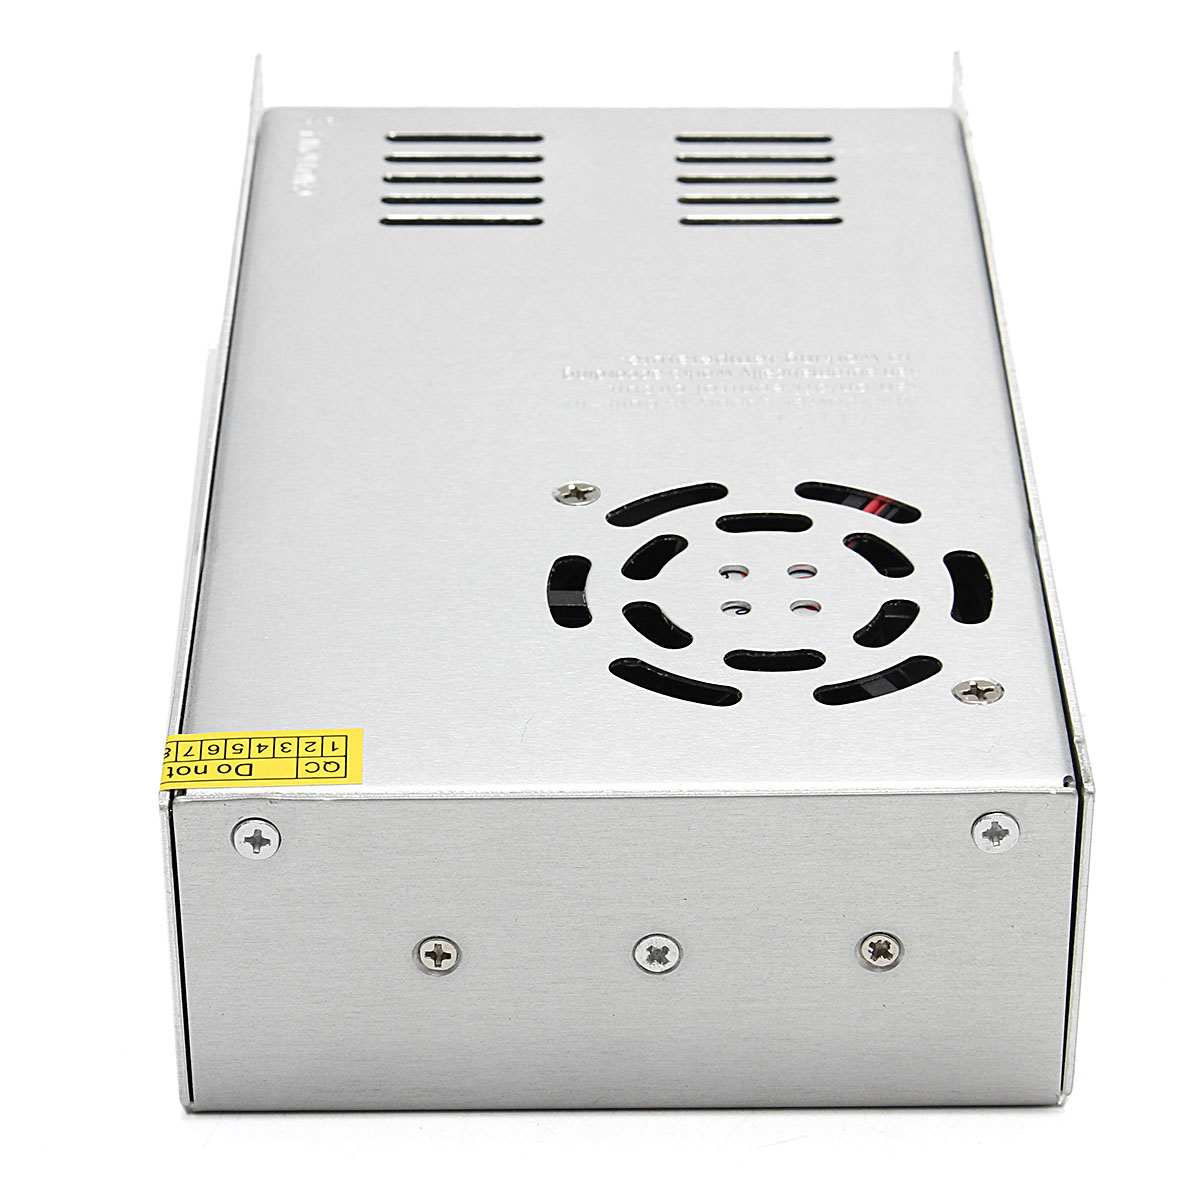 Geekcreitreg-AC-110-240V-Input-To-DC-24V-17A-400W-Switching-Power-Supply-Driver-Board-1272112-4